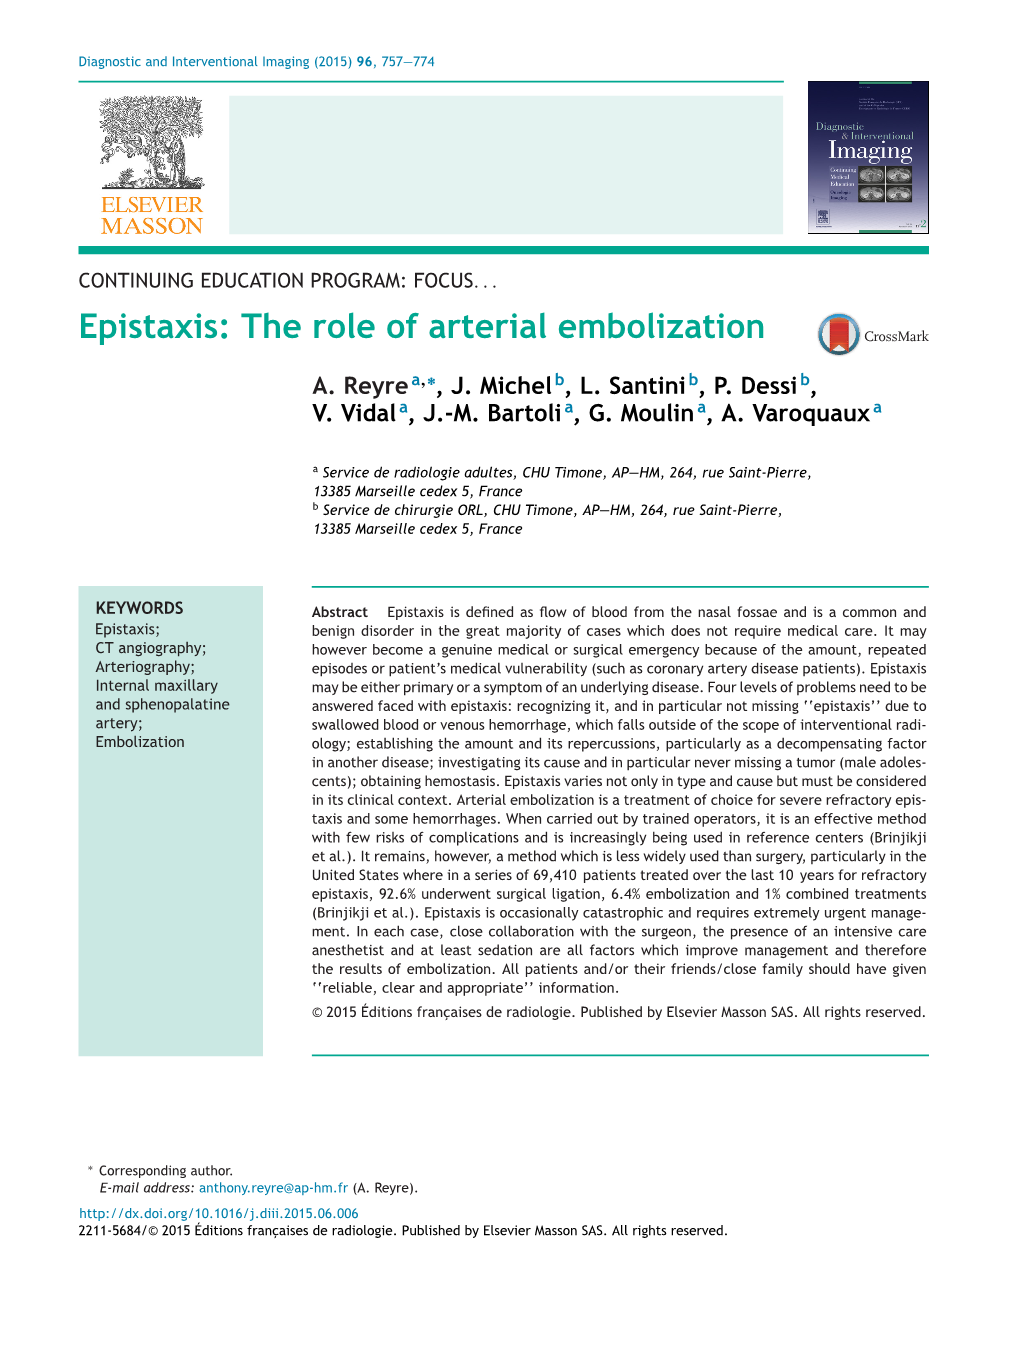 Epistaxis: the Role of Arterial Embolization